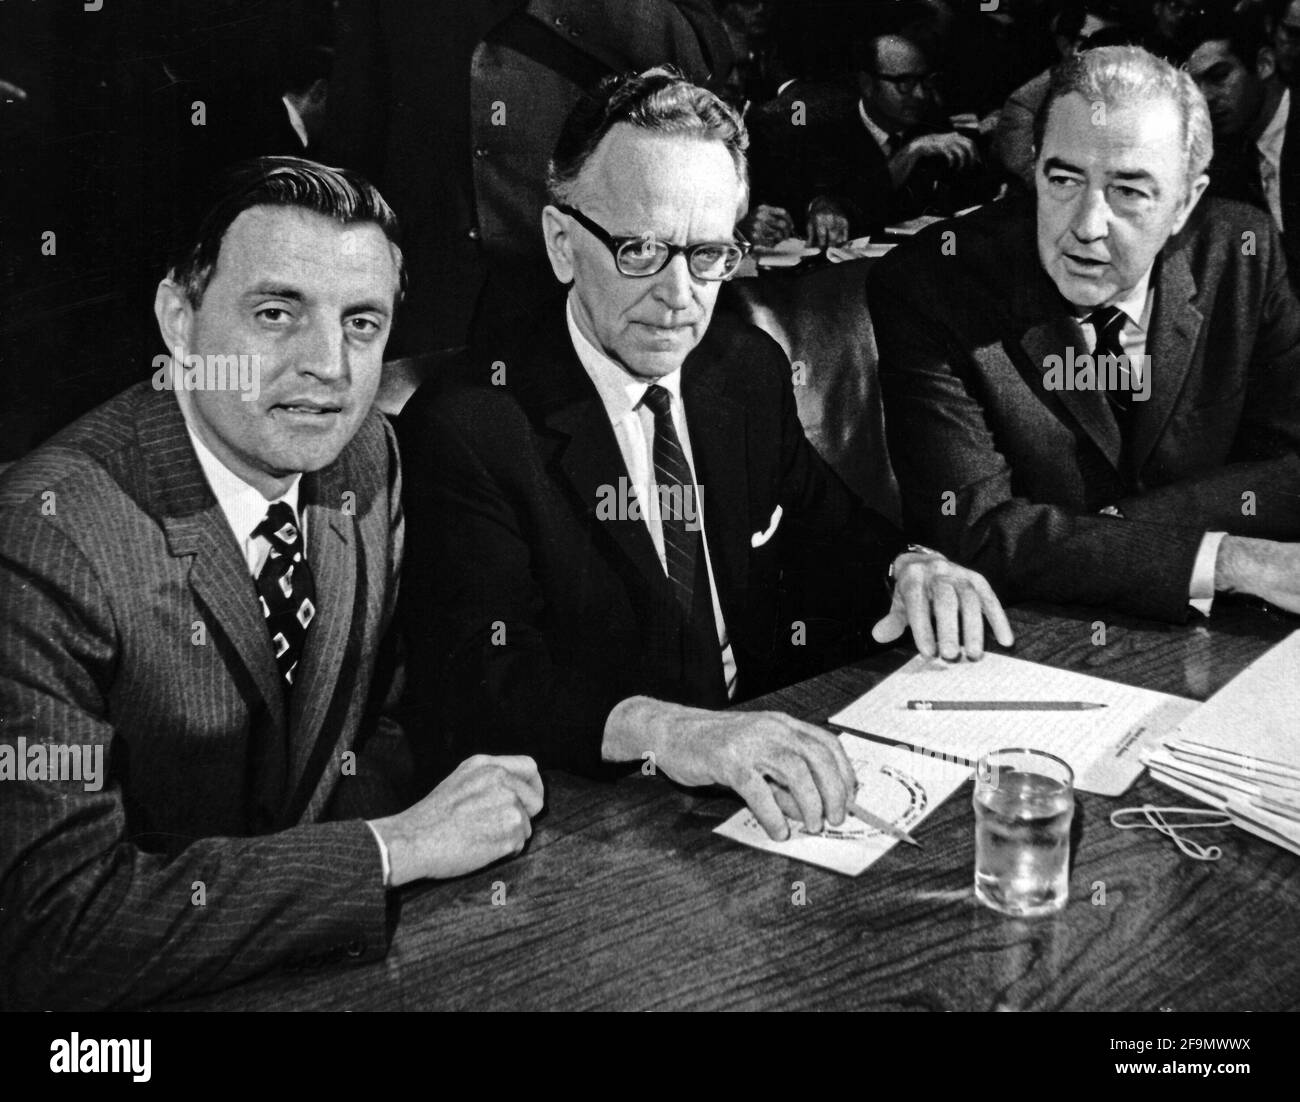 **FILE PHOTO** Walter Mondale Has Passed Away. Harry A. Blackmun, center, United States President Richard M. Nixon's third nominee to be Associate Justice of the U.S. Supreme Court following the resignation of Associate Justice Abe Fortas is shown as he prepares to be introduced to testify before the U.S. Senate Judiciary committee on Wednesday, April 29, 1970. At left is U.S. Senator Walter Mondale (Democrat of Minnesota), left, and U.S. Senator Eugene McCarthy (Democrat of Minnesota), right. Blackmun was confirmed by the Senate on May 12, 1970 and served until his resignation on August 3, Stock Photo